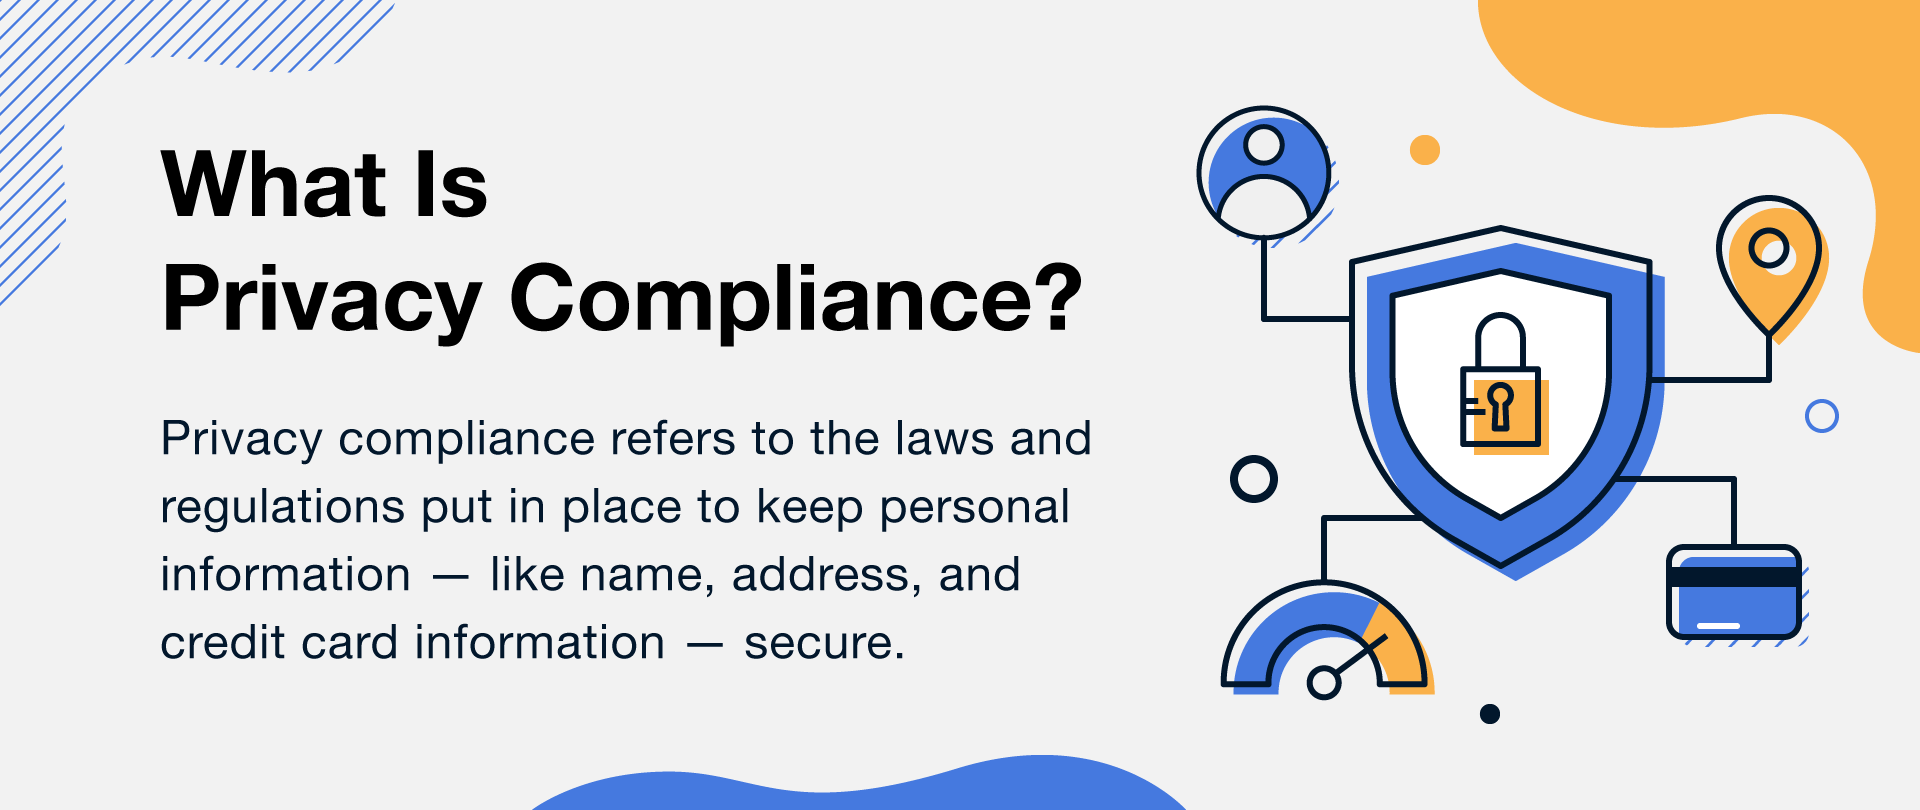 Privacy compliance refers to the laws and regulations put in place to keep personal information—like name, address, and credit card information—secure.